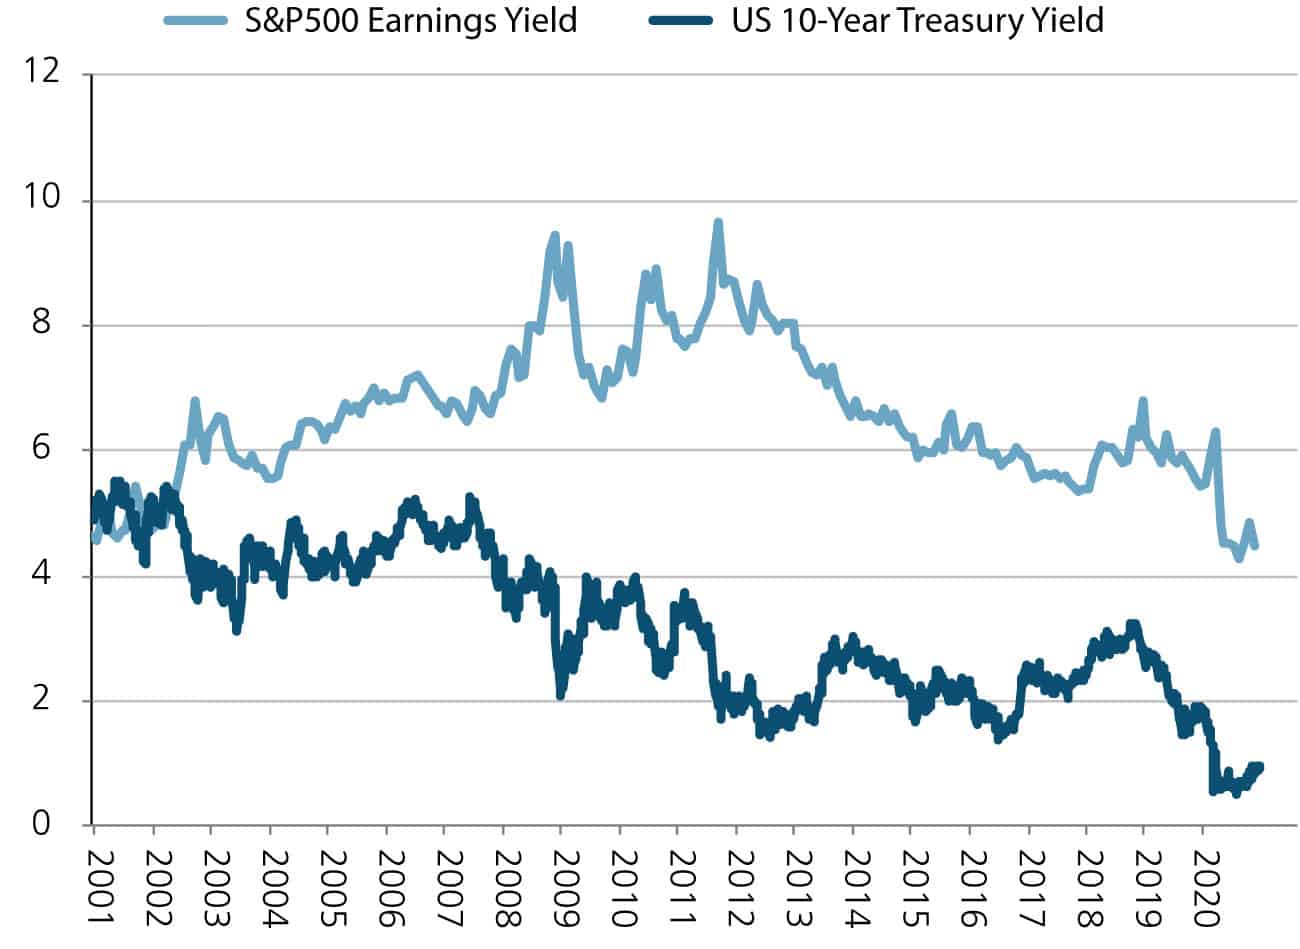 A chart showing the Yield Comparison – Stocks vs. Bonds.